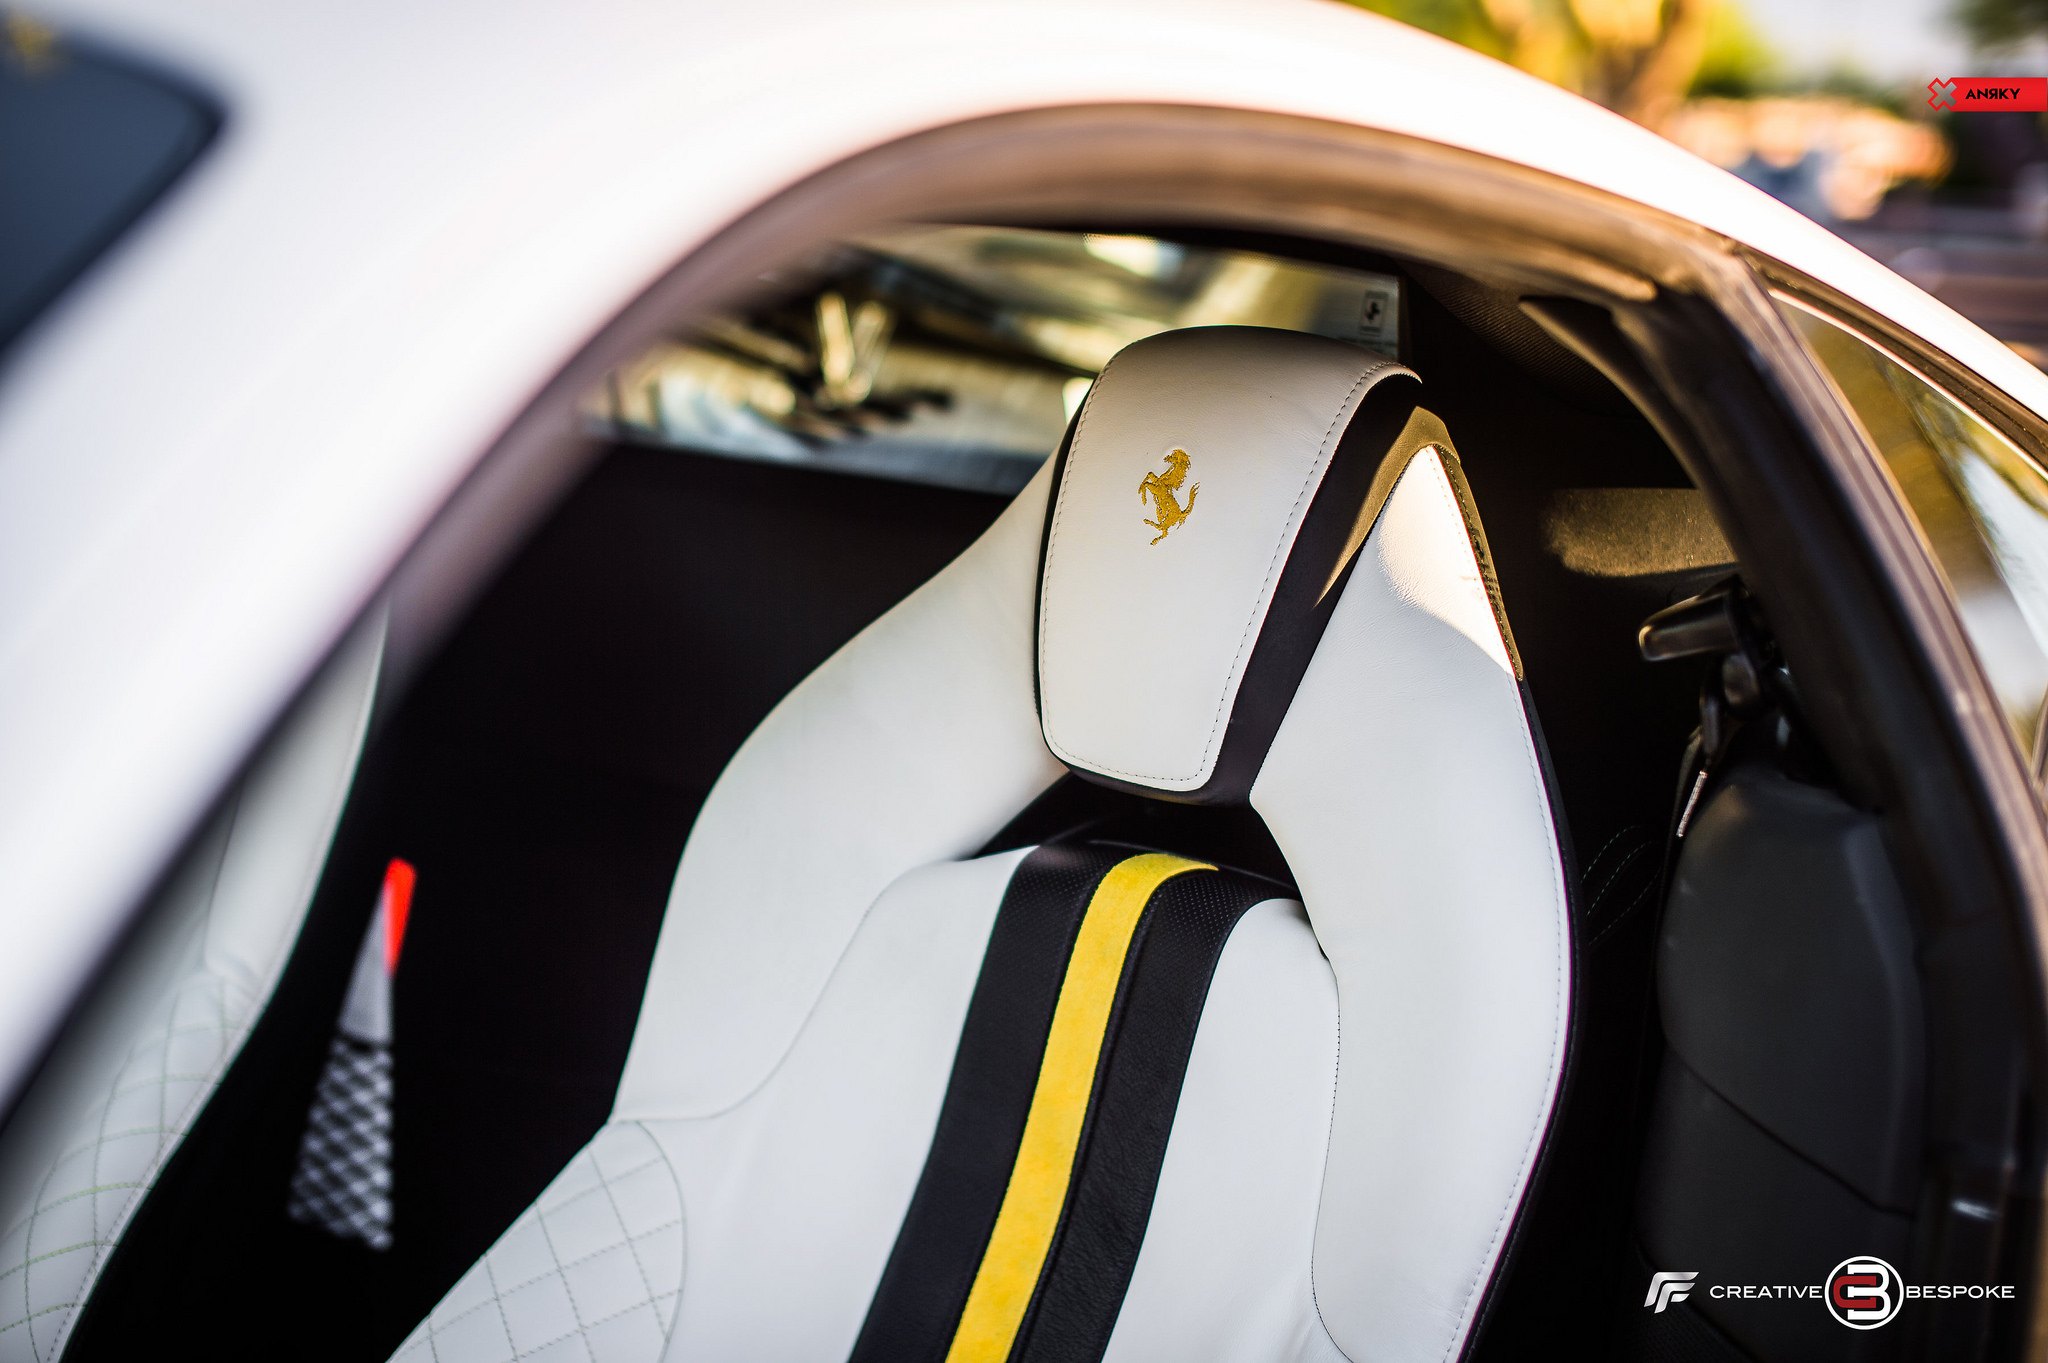 Aftermarket Interior Kit in White Ferrari 488 - Photo by ANRKY Wheels